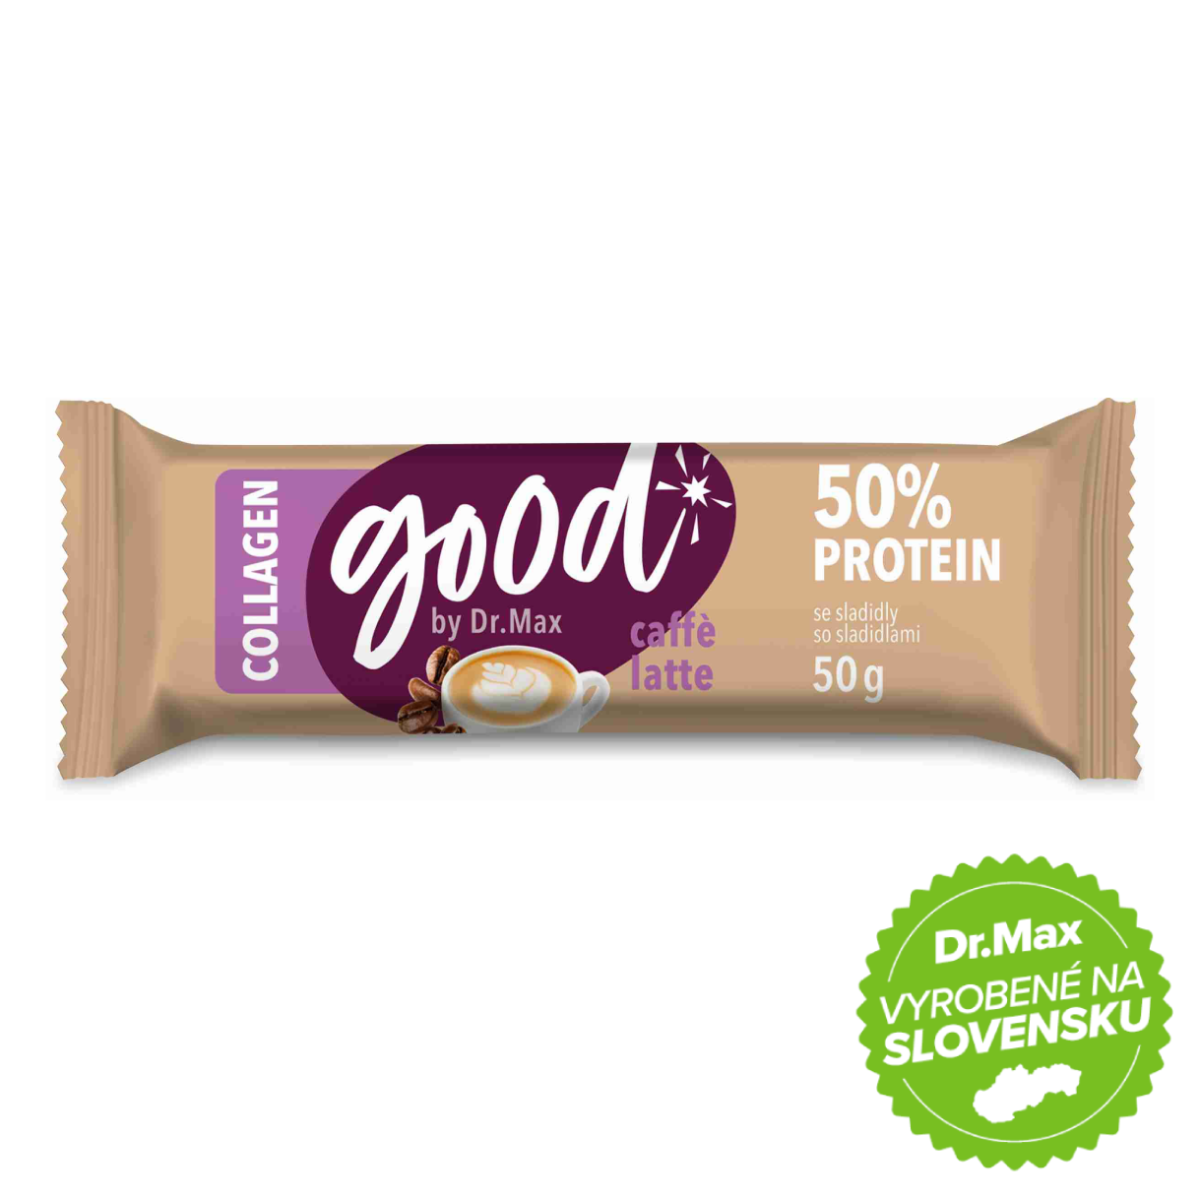 Good BY DR. MAX Protein Bar 50 percent Cafe Latte